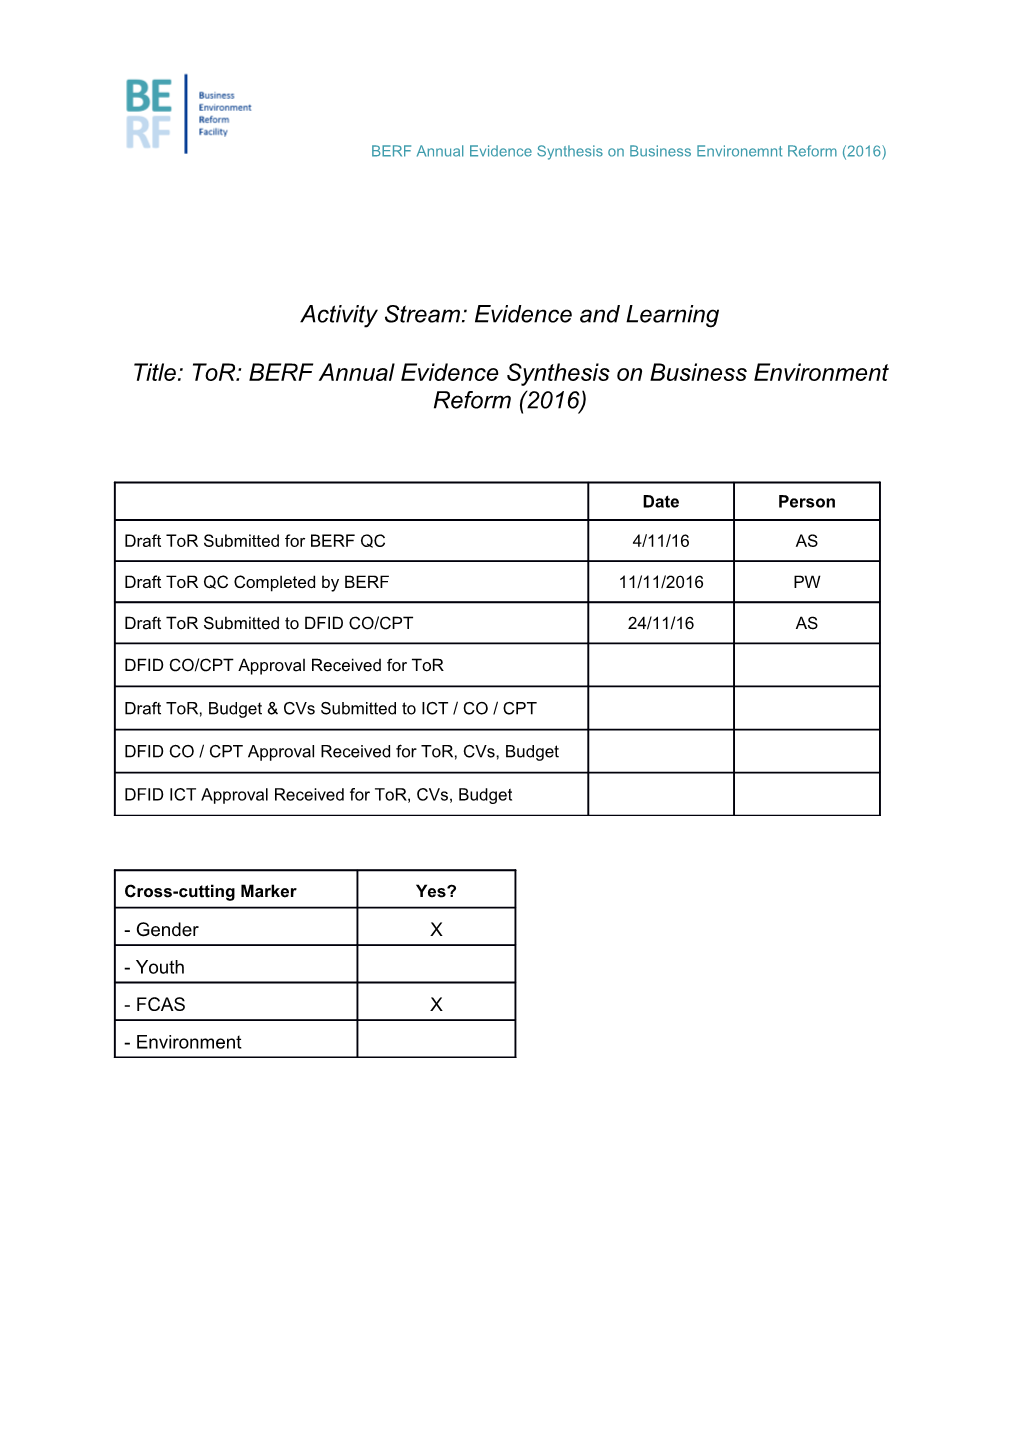 Terms of Reference BERF Annual Evidence Synthesis on Business Environment Reform (2016)